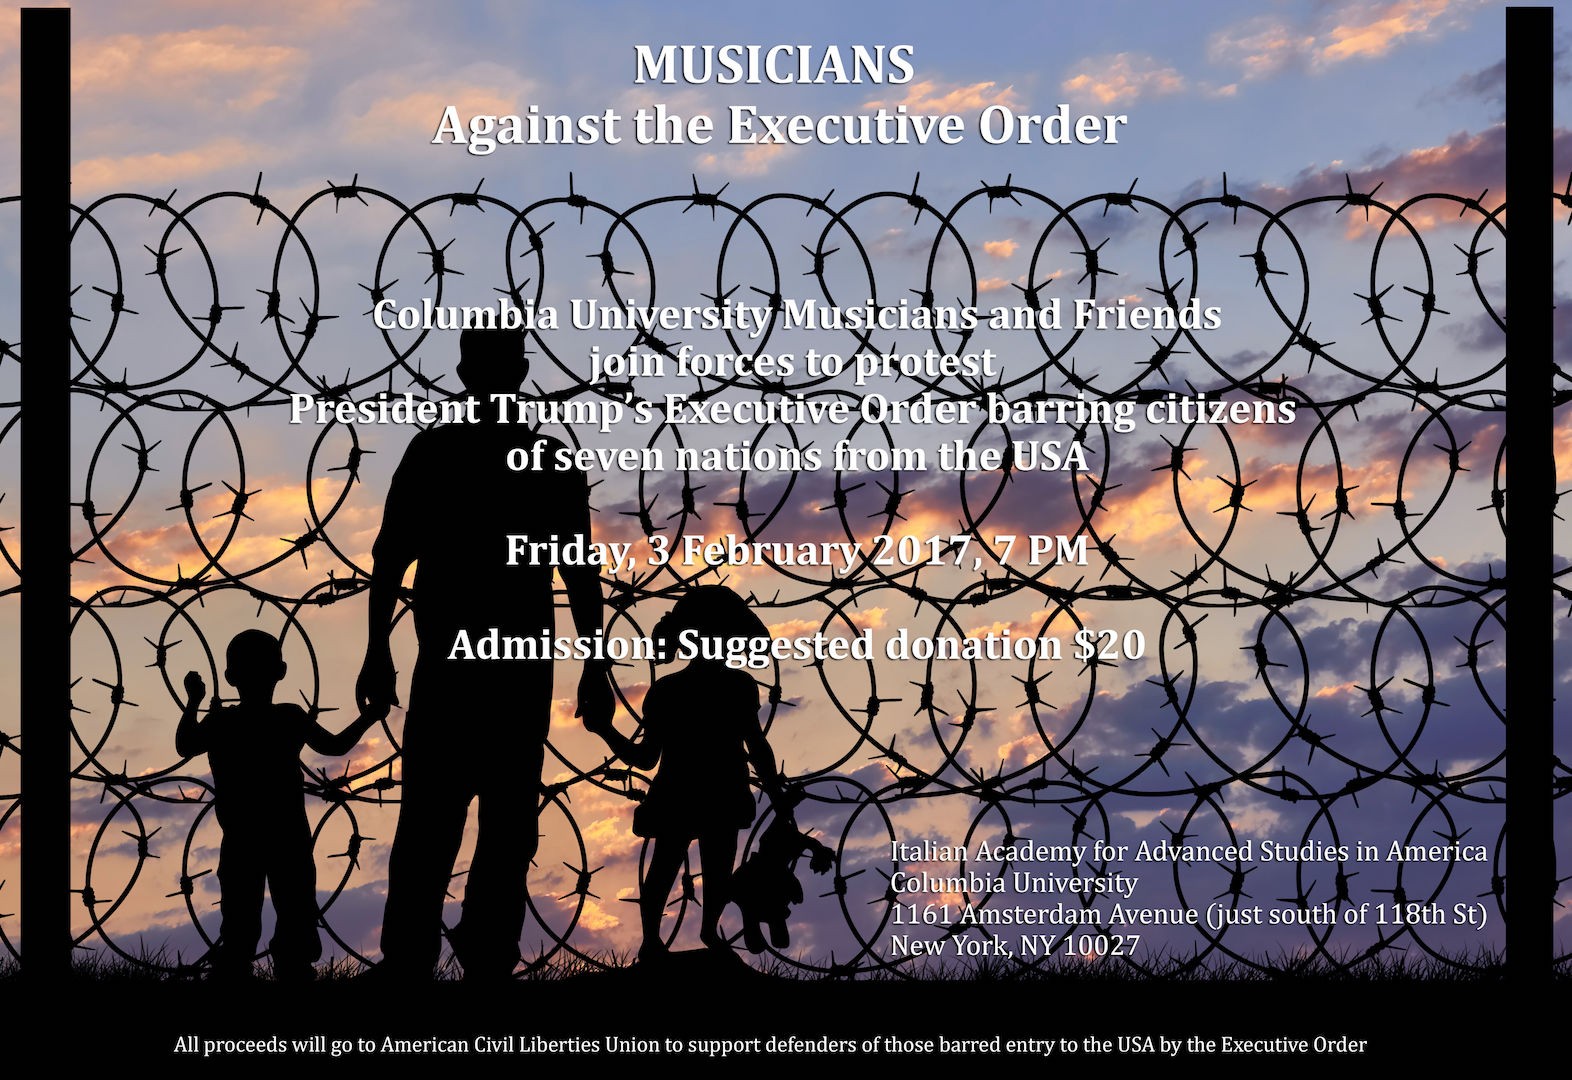 Picture of a flyer for Musicians Against the Executive Order